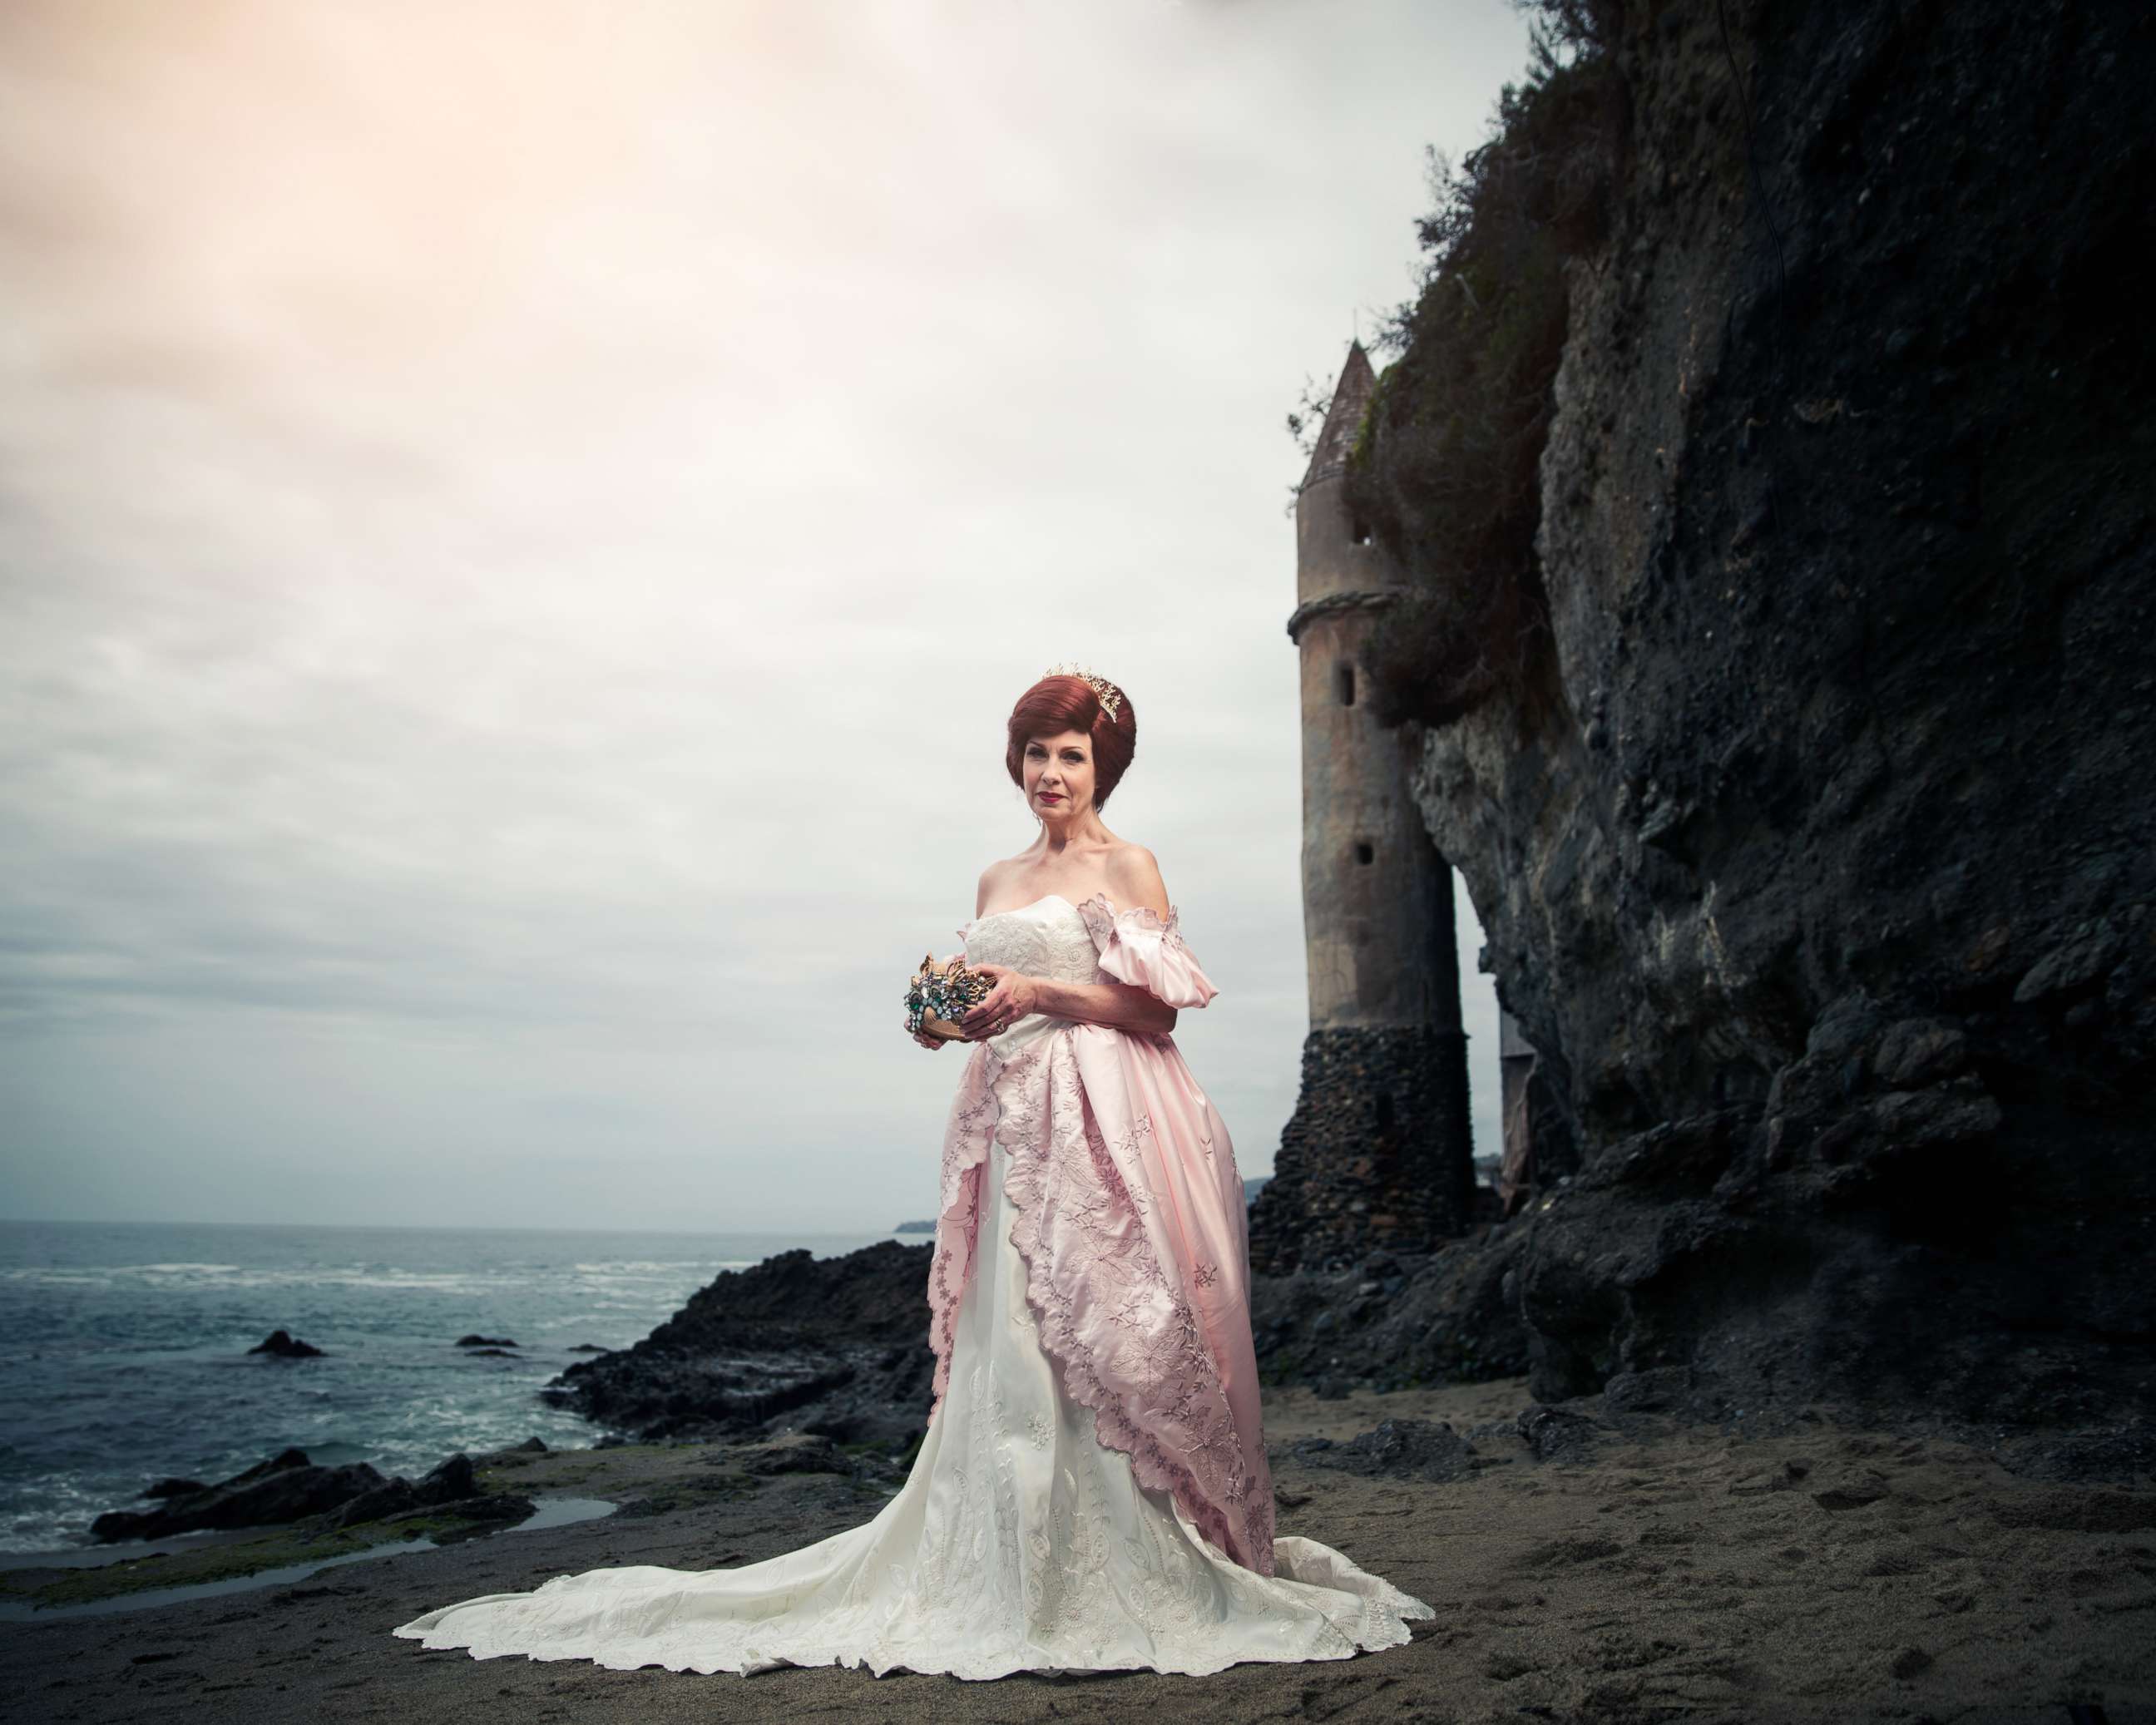 PHOTO: Elizabeth Oden poses as the mother of Ariel from Disney's "The Little Mermaid" in a photo shoot conceptualized by designer Nephi Garcia and photographer Tony Ross.